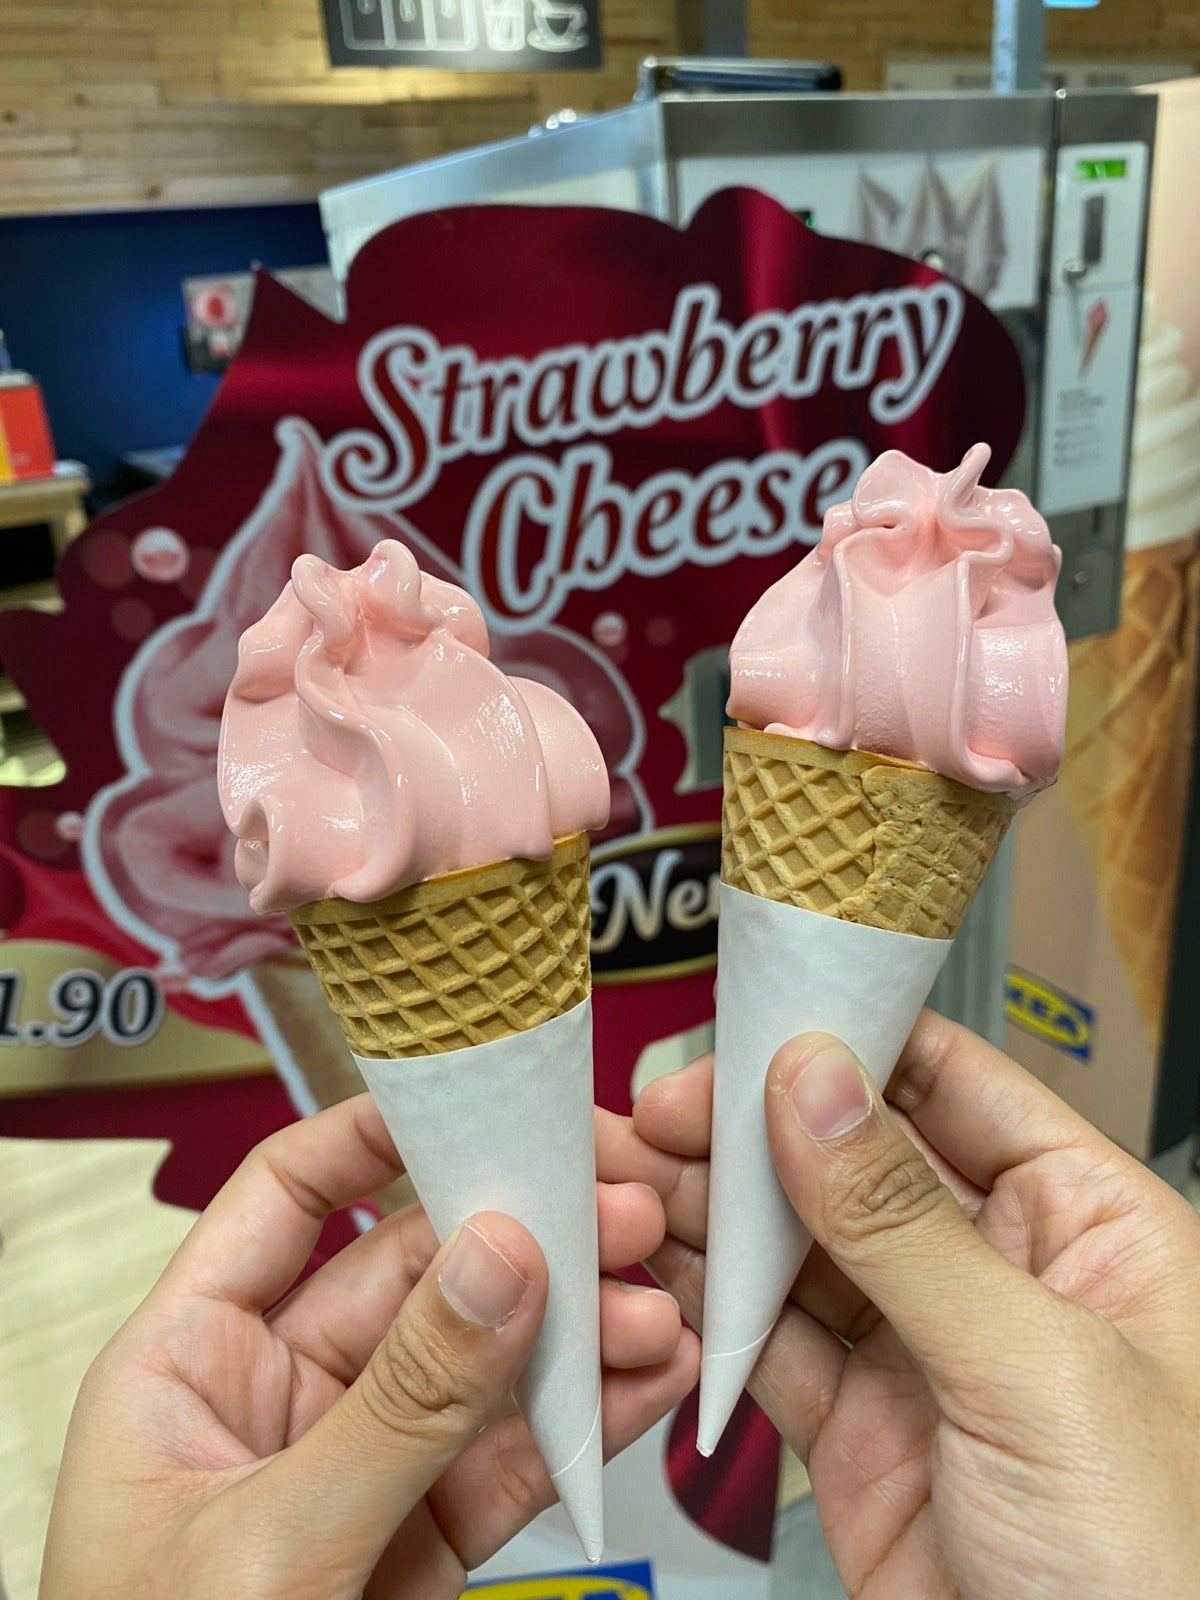 Do You Know That IKEA Now Has Strawberry Ice Cream & Also Brown Sugar Boba?! - WORLD OF BUZZ 7